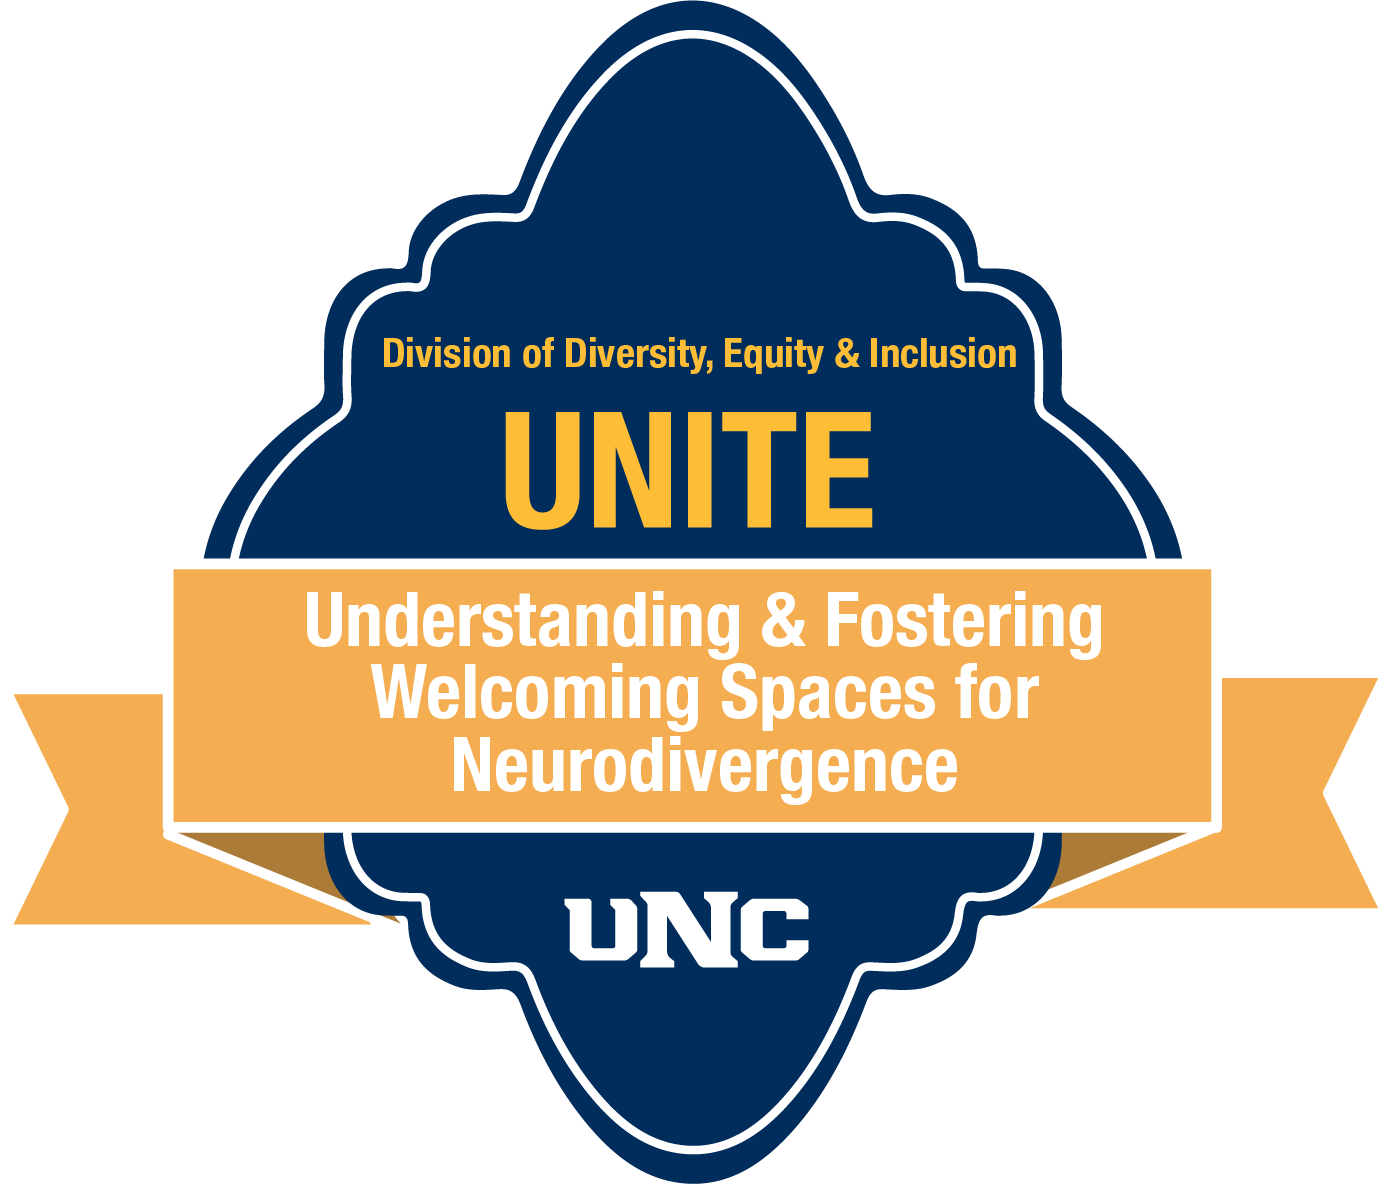 Understanding & fostering welcoming spaces for Neurodivergence